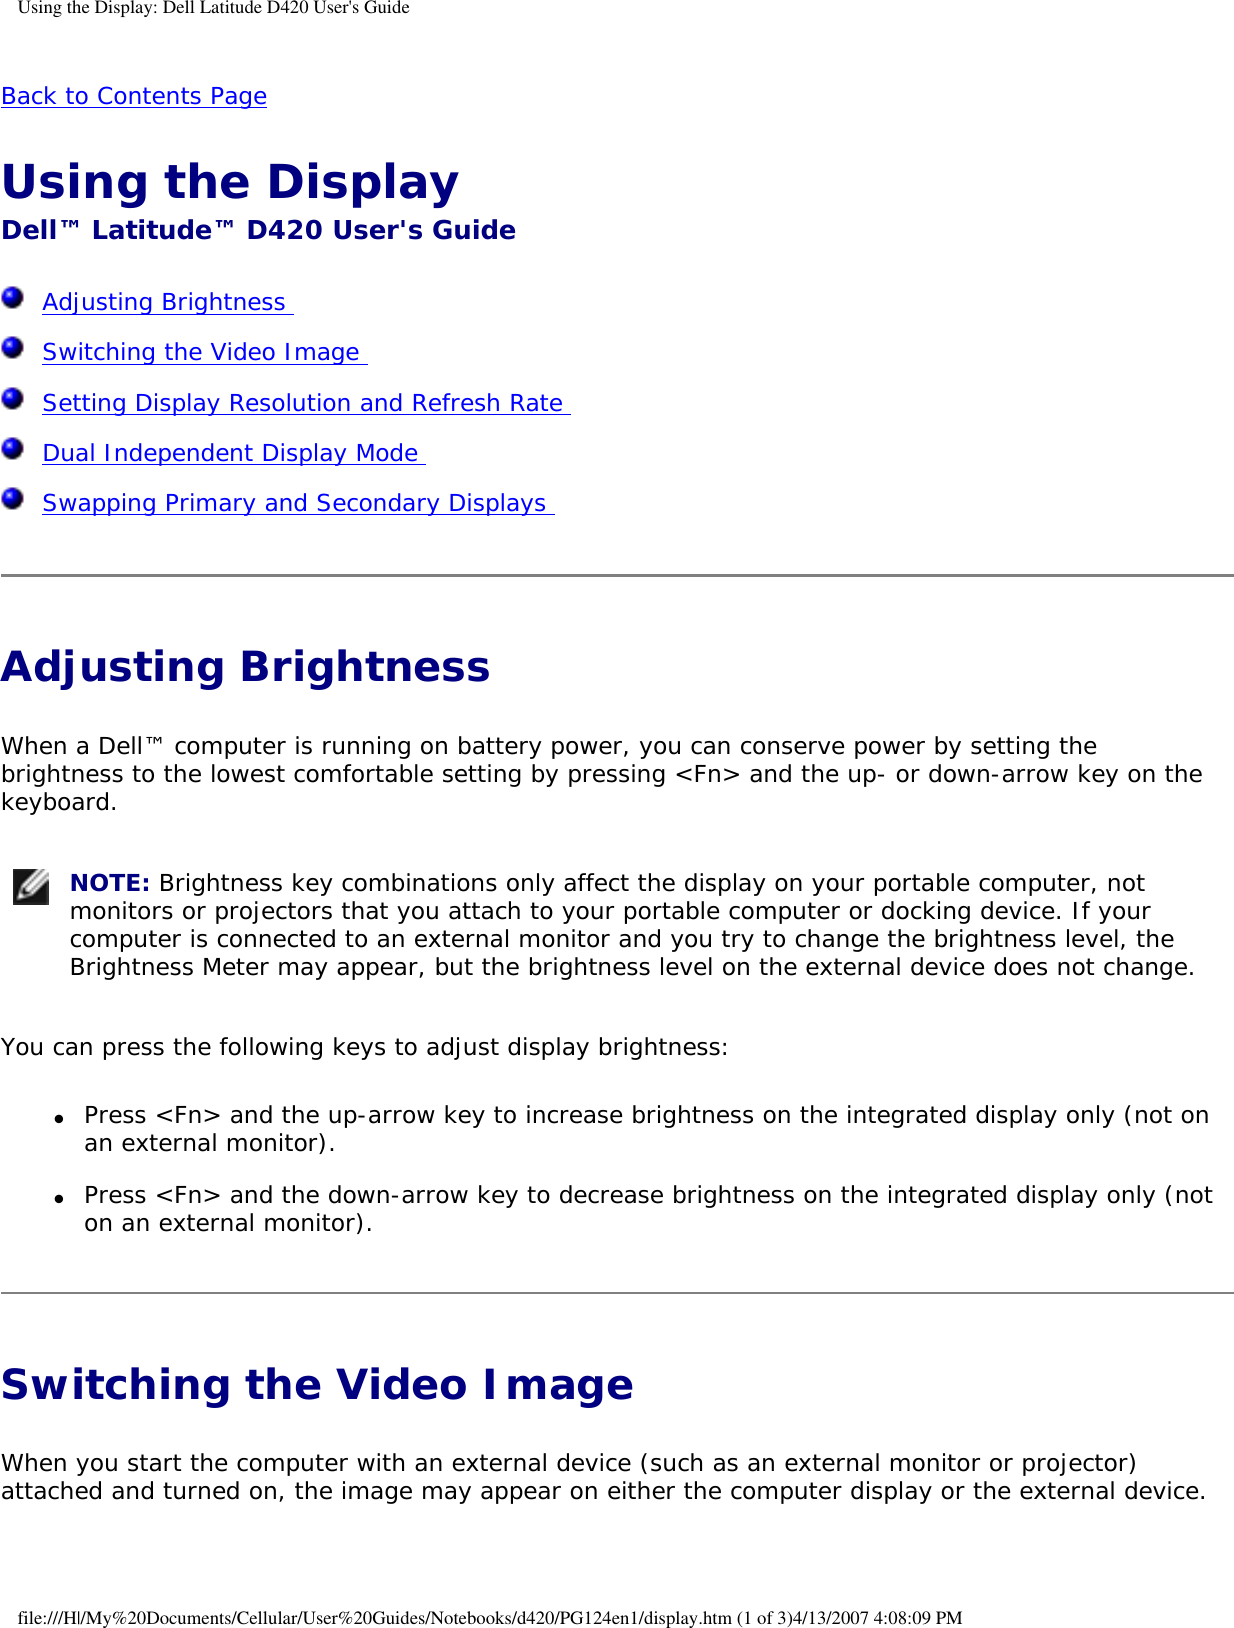 Using the Display: Dell Latitude D420 User&apos;s GuideBack to Contents Page Using the Display Dell™ Latitude™ D420 User&apos;s Guide  Adjusting Brightness   Switching the Video Image   Setting Display Resolution and Refresh Rate   Dual Independent Display Mode   Swapping Primary and Secondary Displays  Adjusting Brightness When a Dell™ computer is running on battery power, you can conserve power by setting the brightness to the lowest comfortable setting by pressing &lt;Fn&gt; and the up- or down-arrow key on the keyboard. NOTE: Brightness key combinations only affect the display on your portable computer, not monitors or projectors that you attach to your portable computer or docking device. If your computer is connected to an external monitor and you try to change the brightness level, the Brightness Meter may appear, but the brightness level on the external device does not change. You can press the following keys to adjust display brightness:●     Press &lt;Fn&gt; and the up-arrow key to increase brightness on the integrated display only (not on an external monitor).  ●     Press &lt;Fn&gt; and the down-arrow key to decrease brightness on the integrated display only (not on an external monitor).  Switching the Video Image When you start the computer with an external device (such as an external monitor or projector) attached and turned on, the image may appear on either the computer display or the external device.file:///H|/My%20Documents/Cellular/User%20Guides/Notebooks/d420/PG124en1/display.htm (1 of 3)4/13/2007 4:08:09 PM